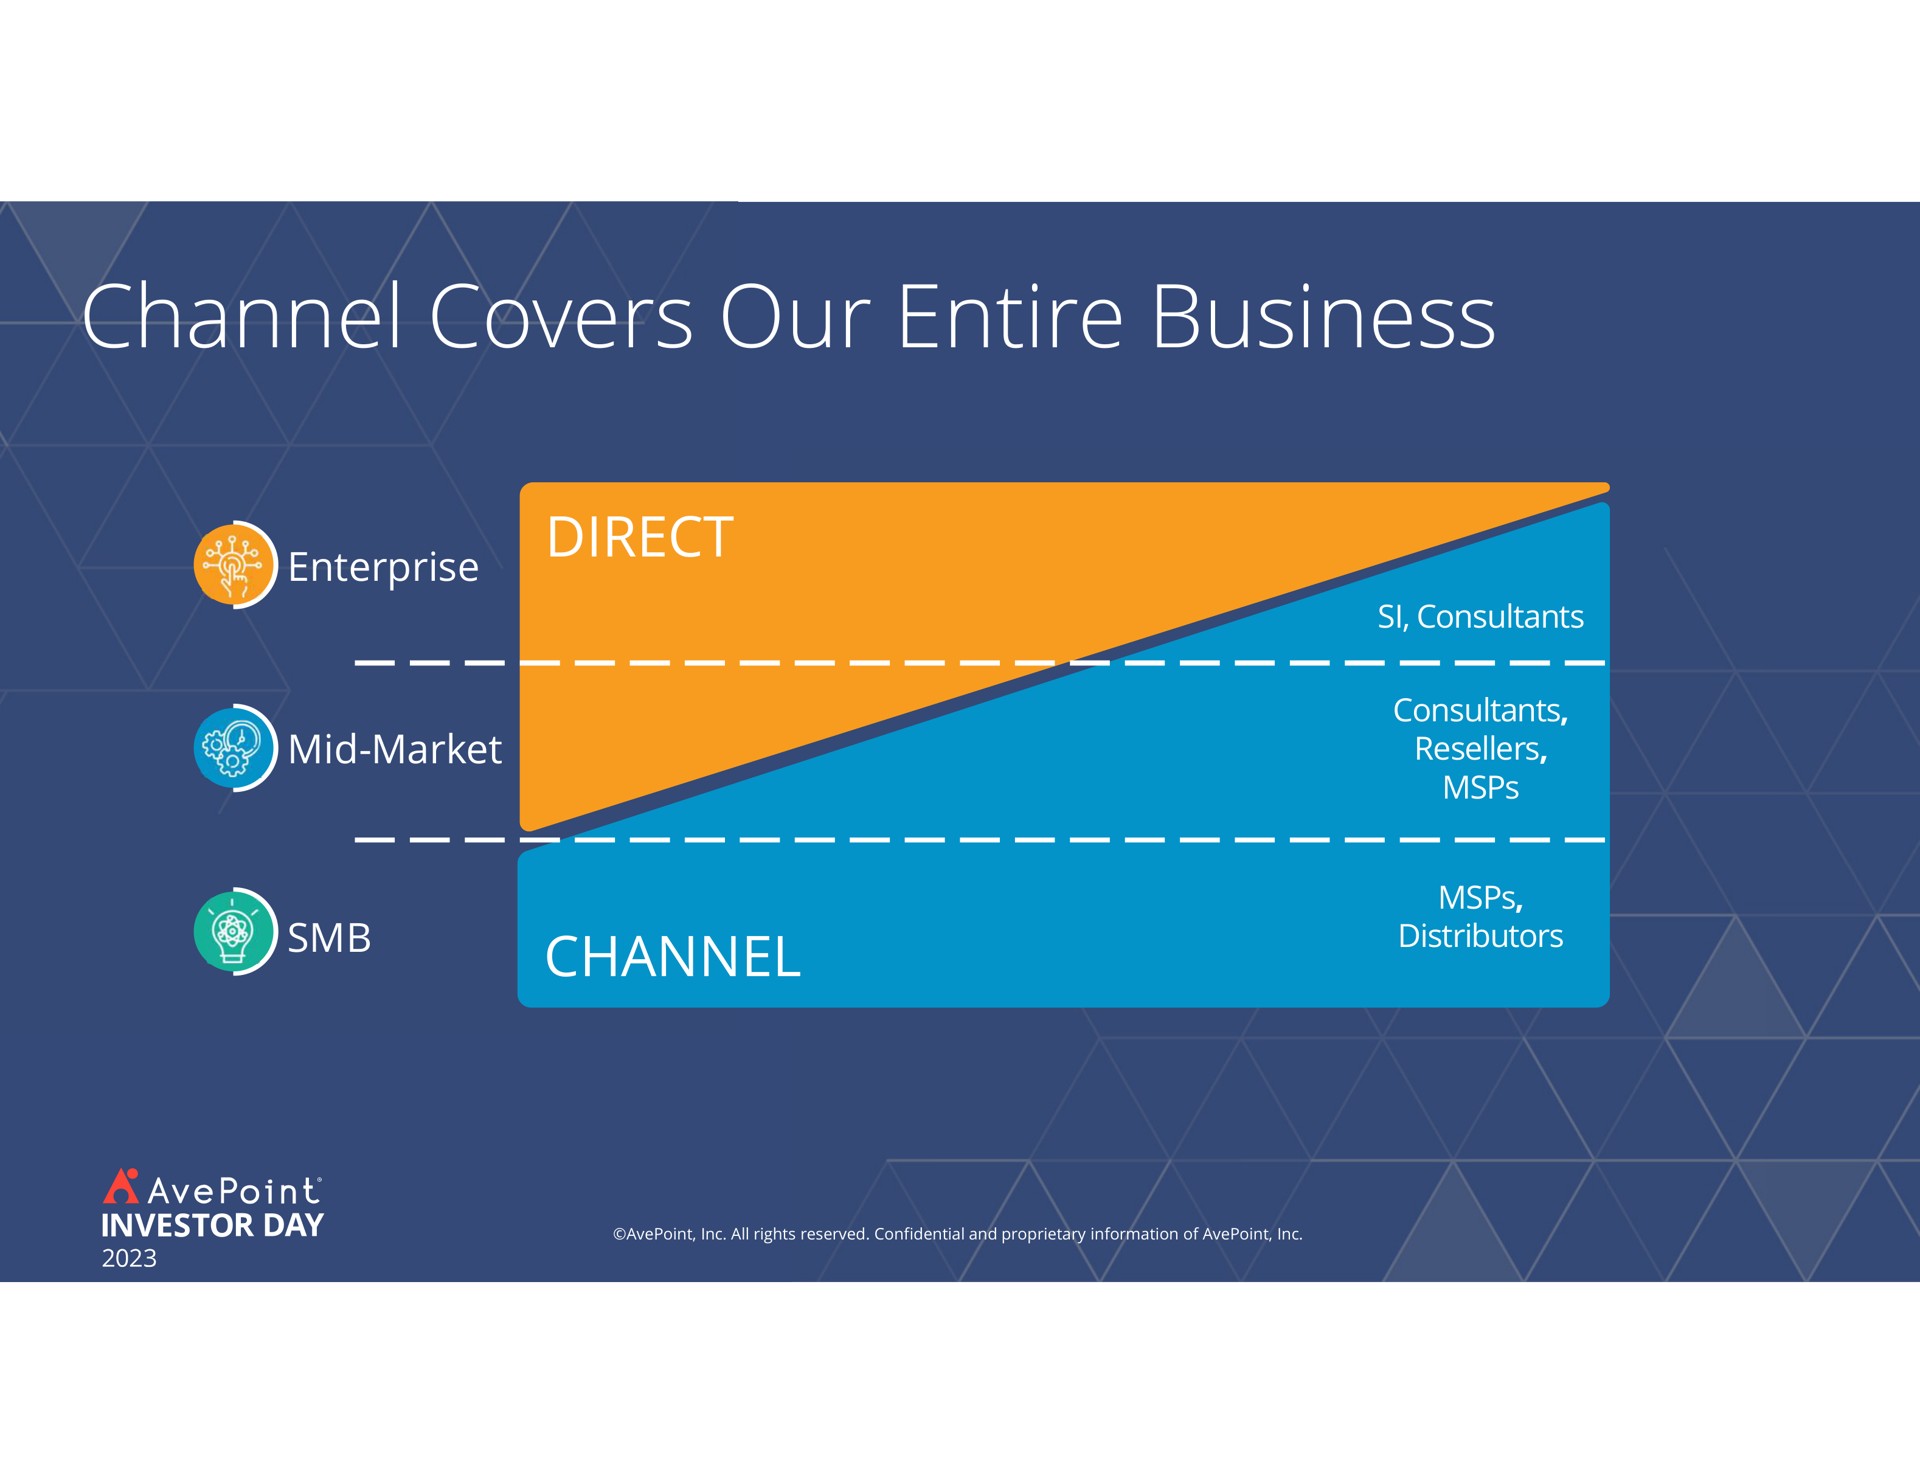 channel covers our entire business enterprise mid market i rectal distributors | AvePoint